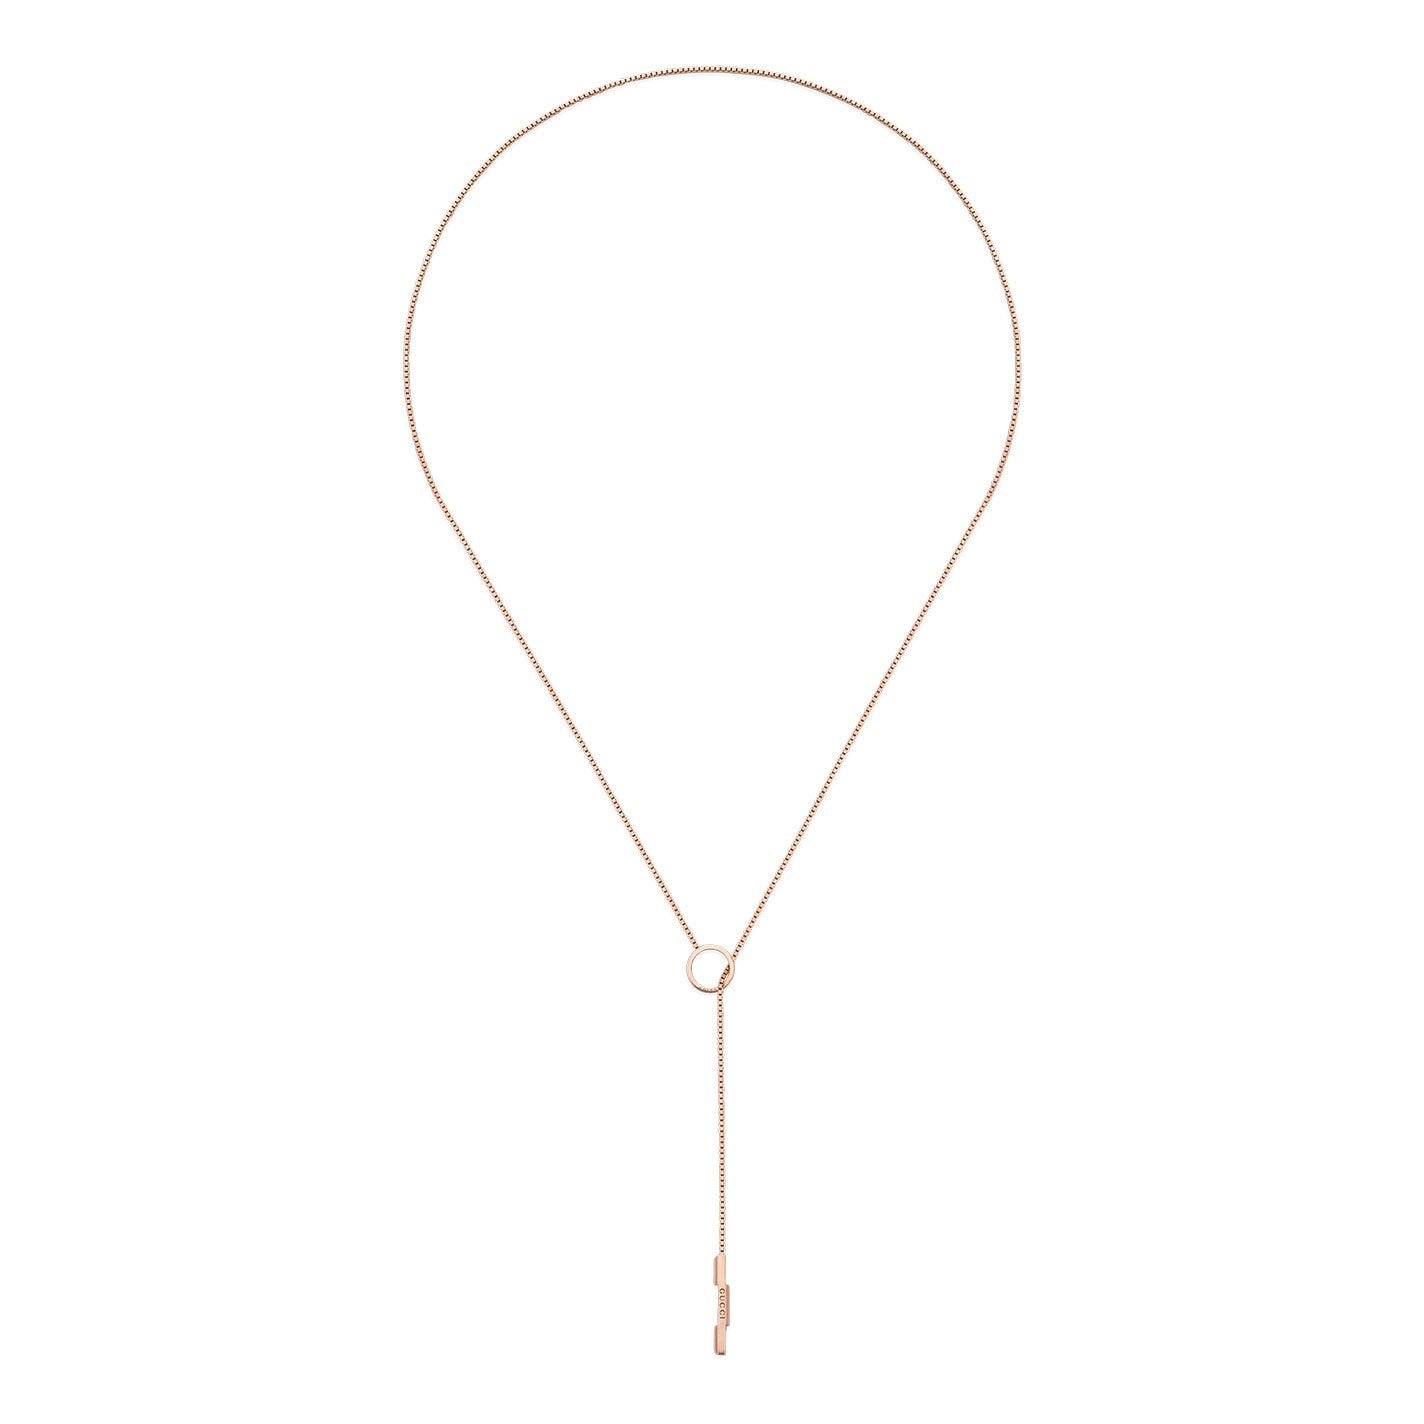 Gucci Link to Love 18K Rose Gold Lartiat Necklace with Bar Pendant